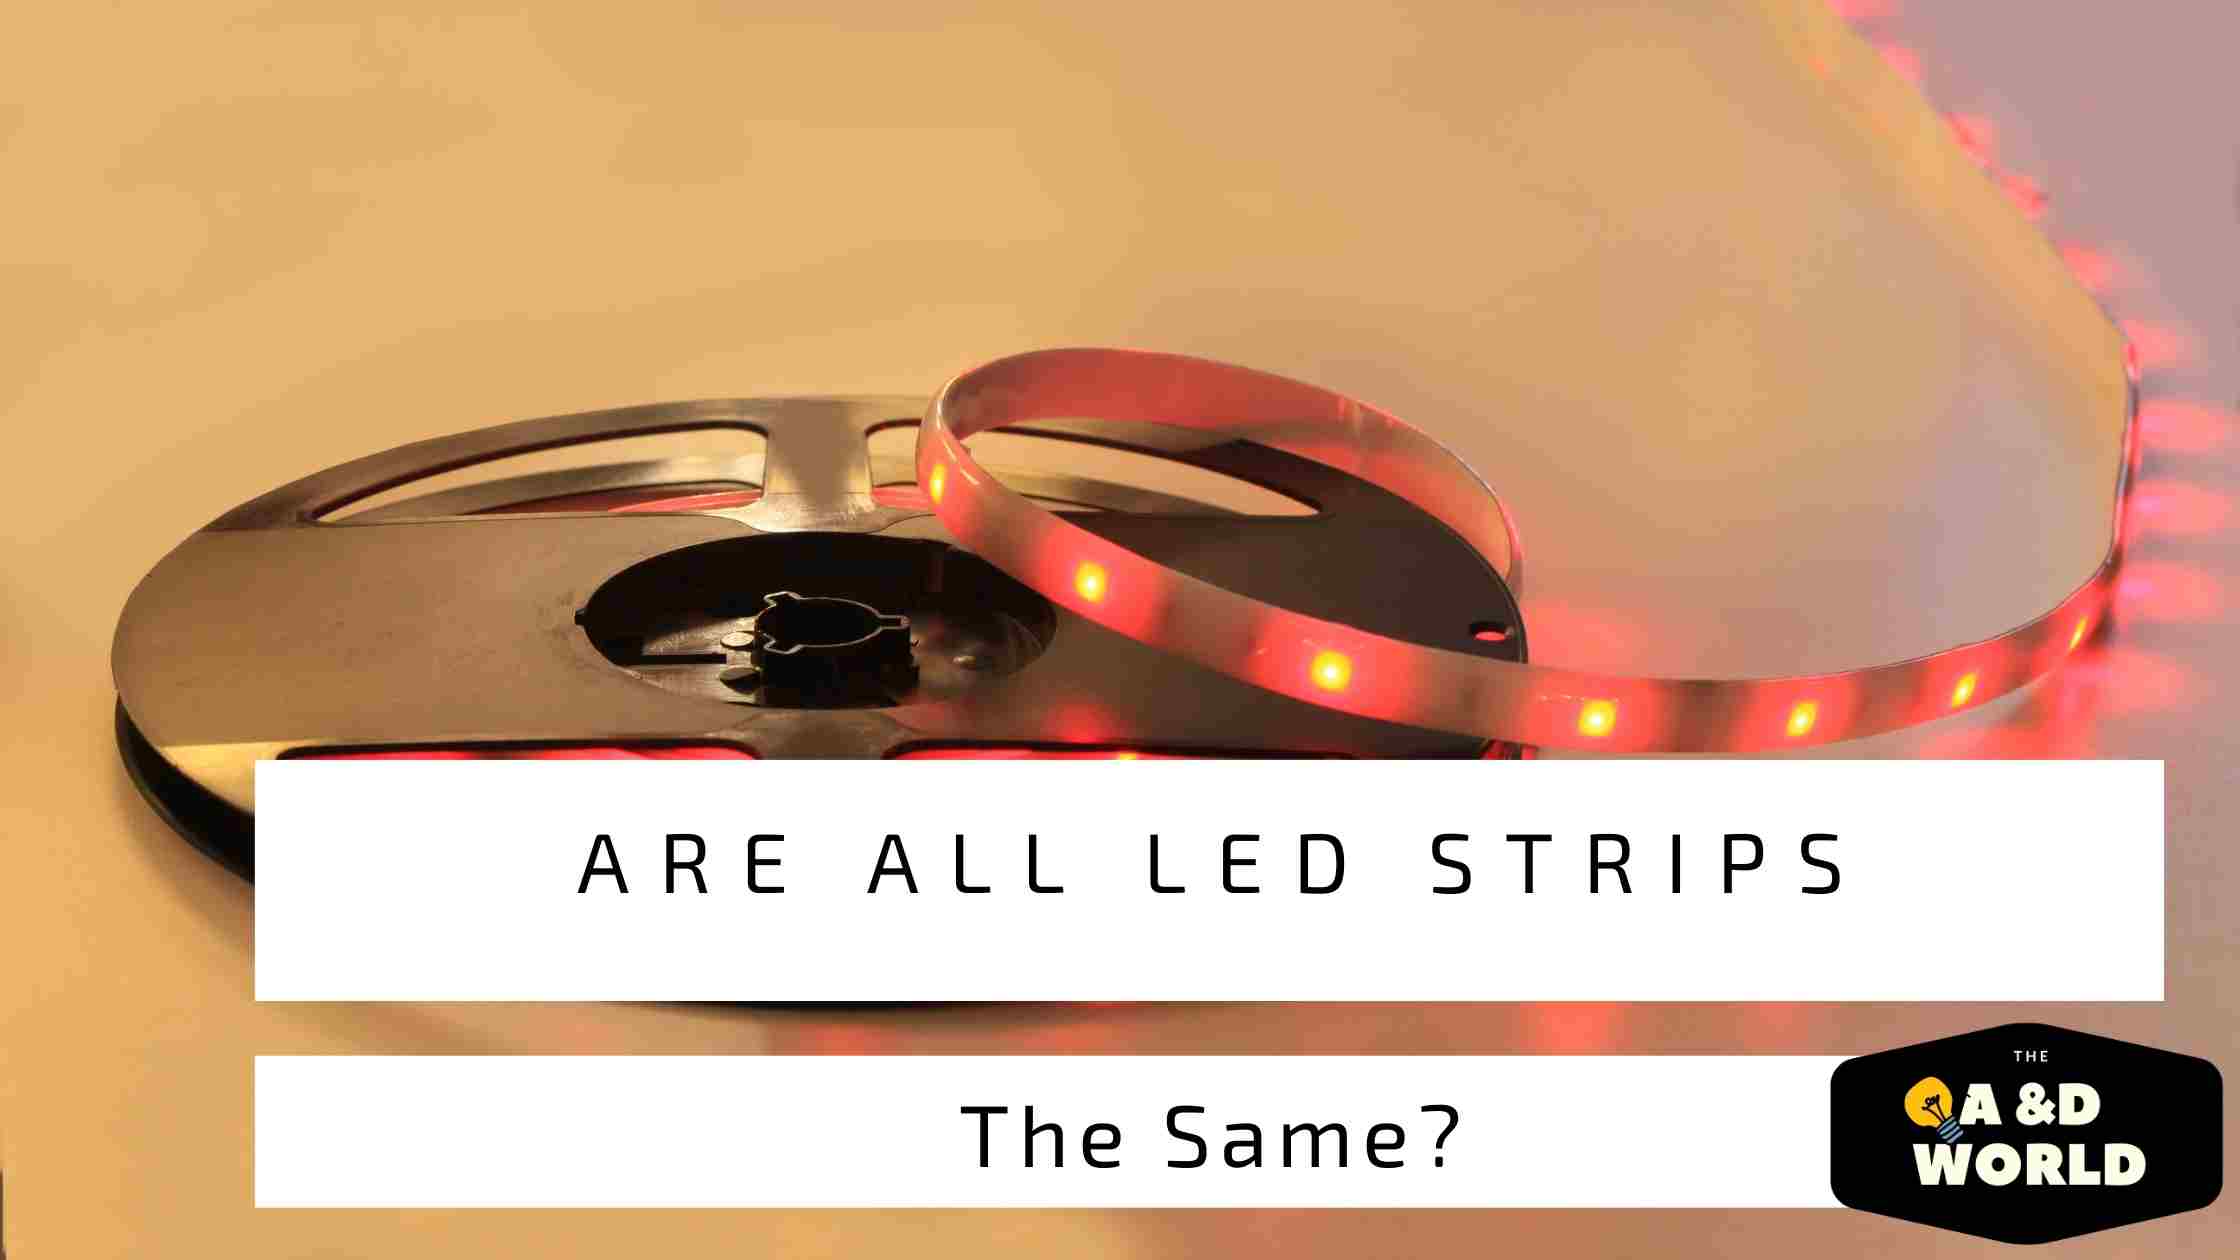 Are All Led Strips The Same?